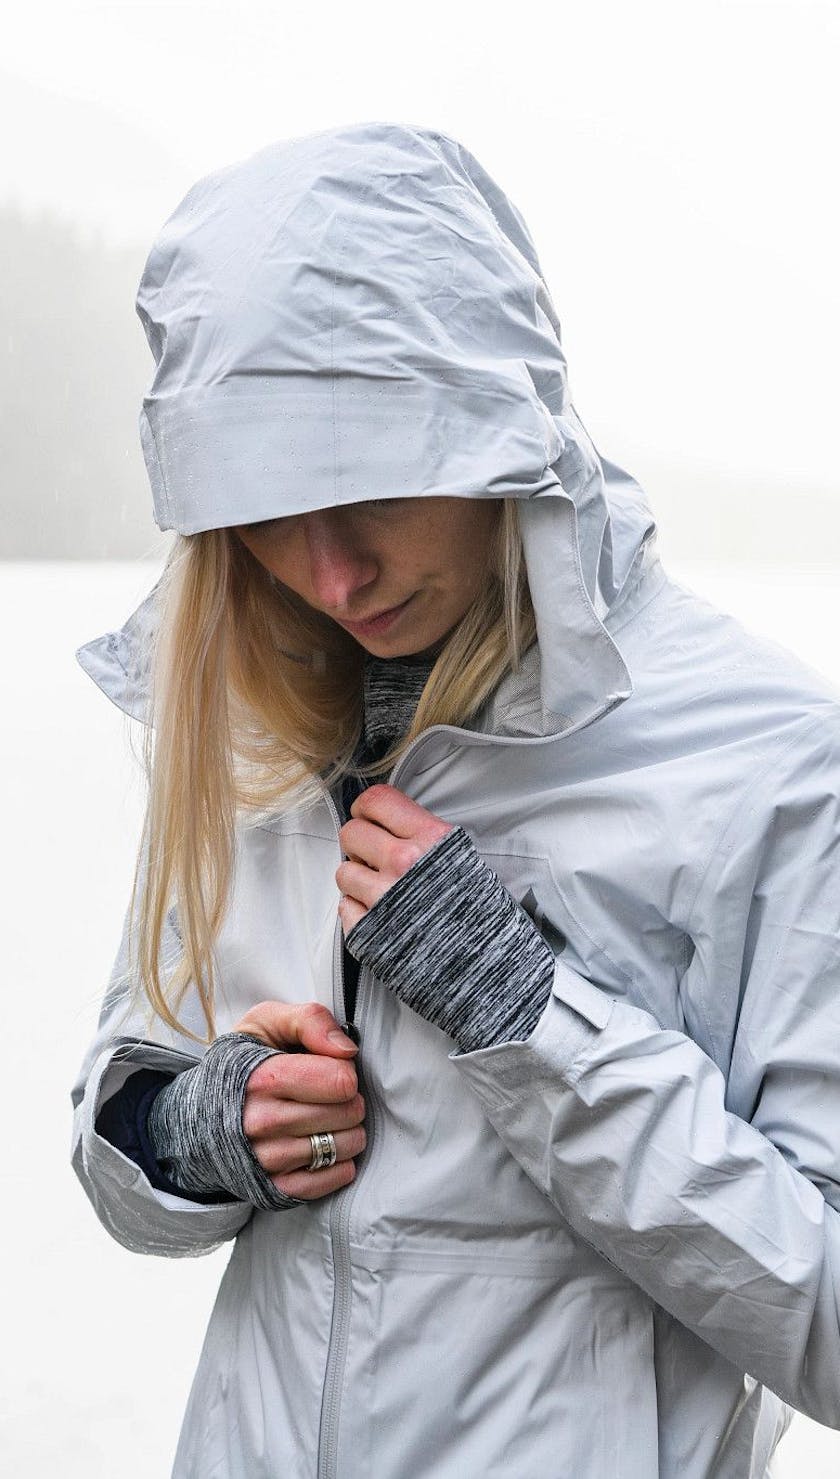 A woman zipping up the Stormline Stretch Rain Shell that she is wearing